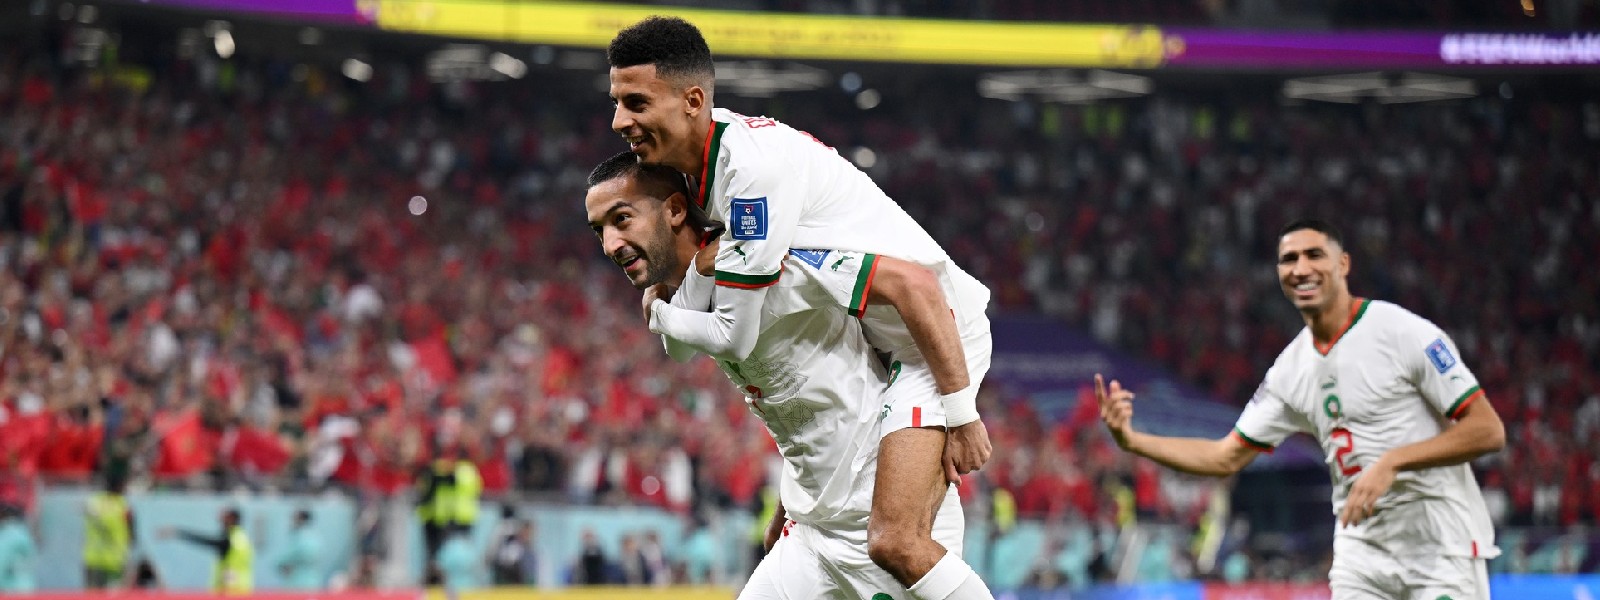 FIFA World Cup: Morocco beat Canada 2-1 and are through to knockouts